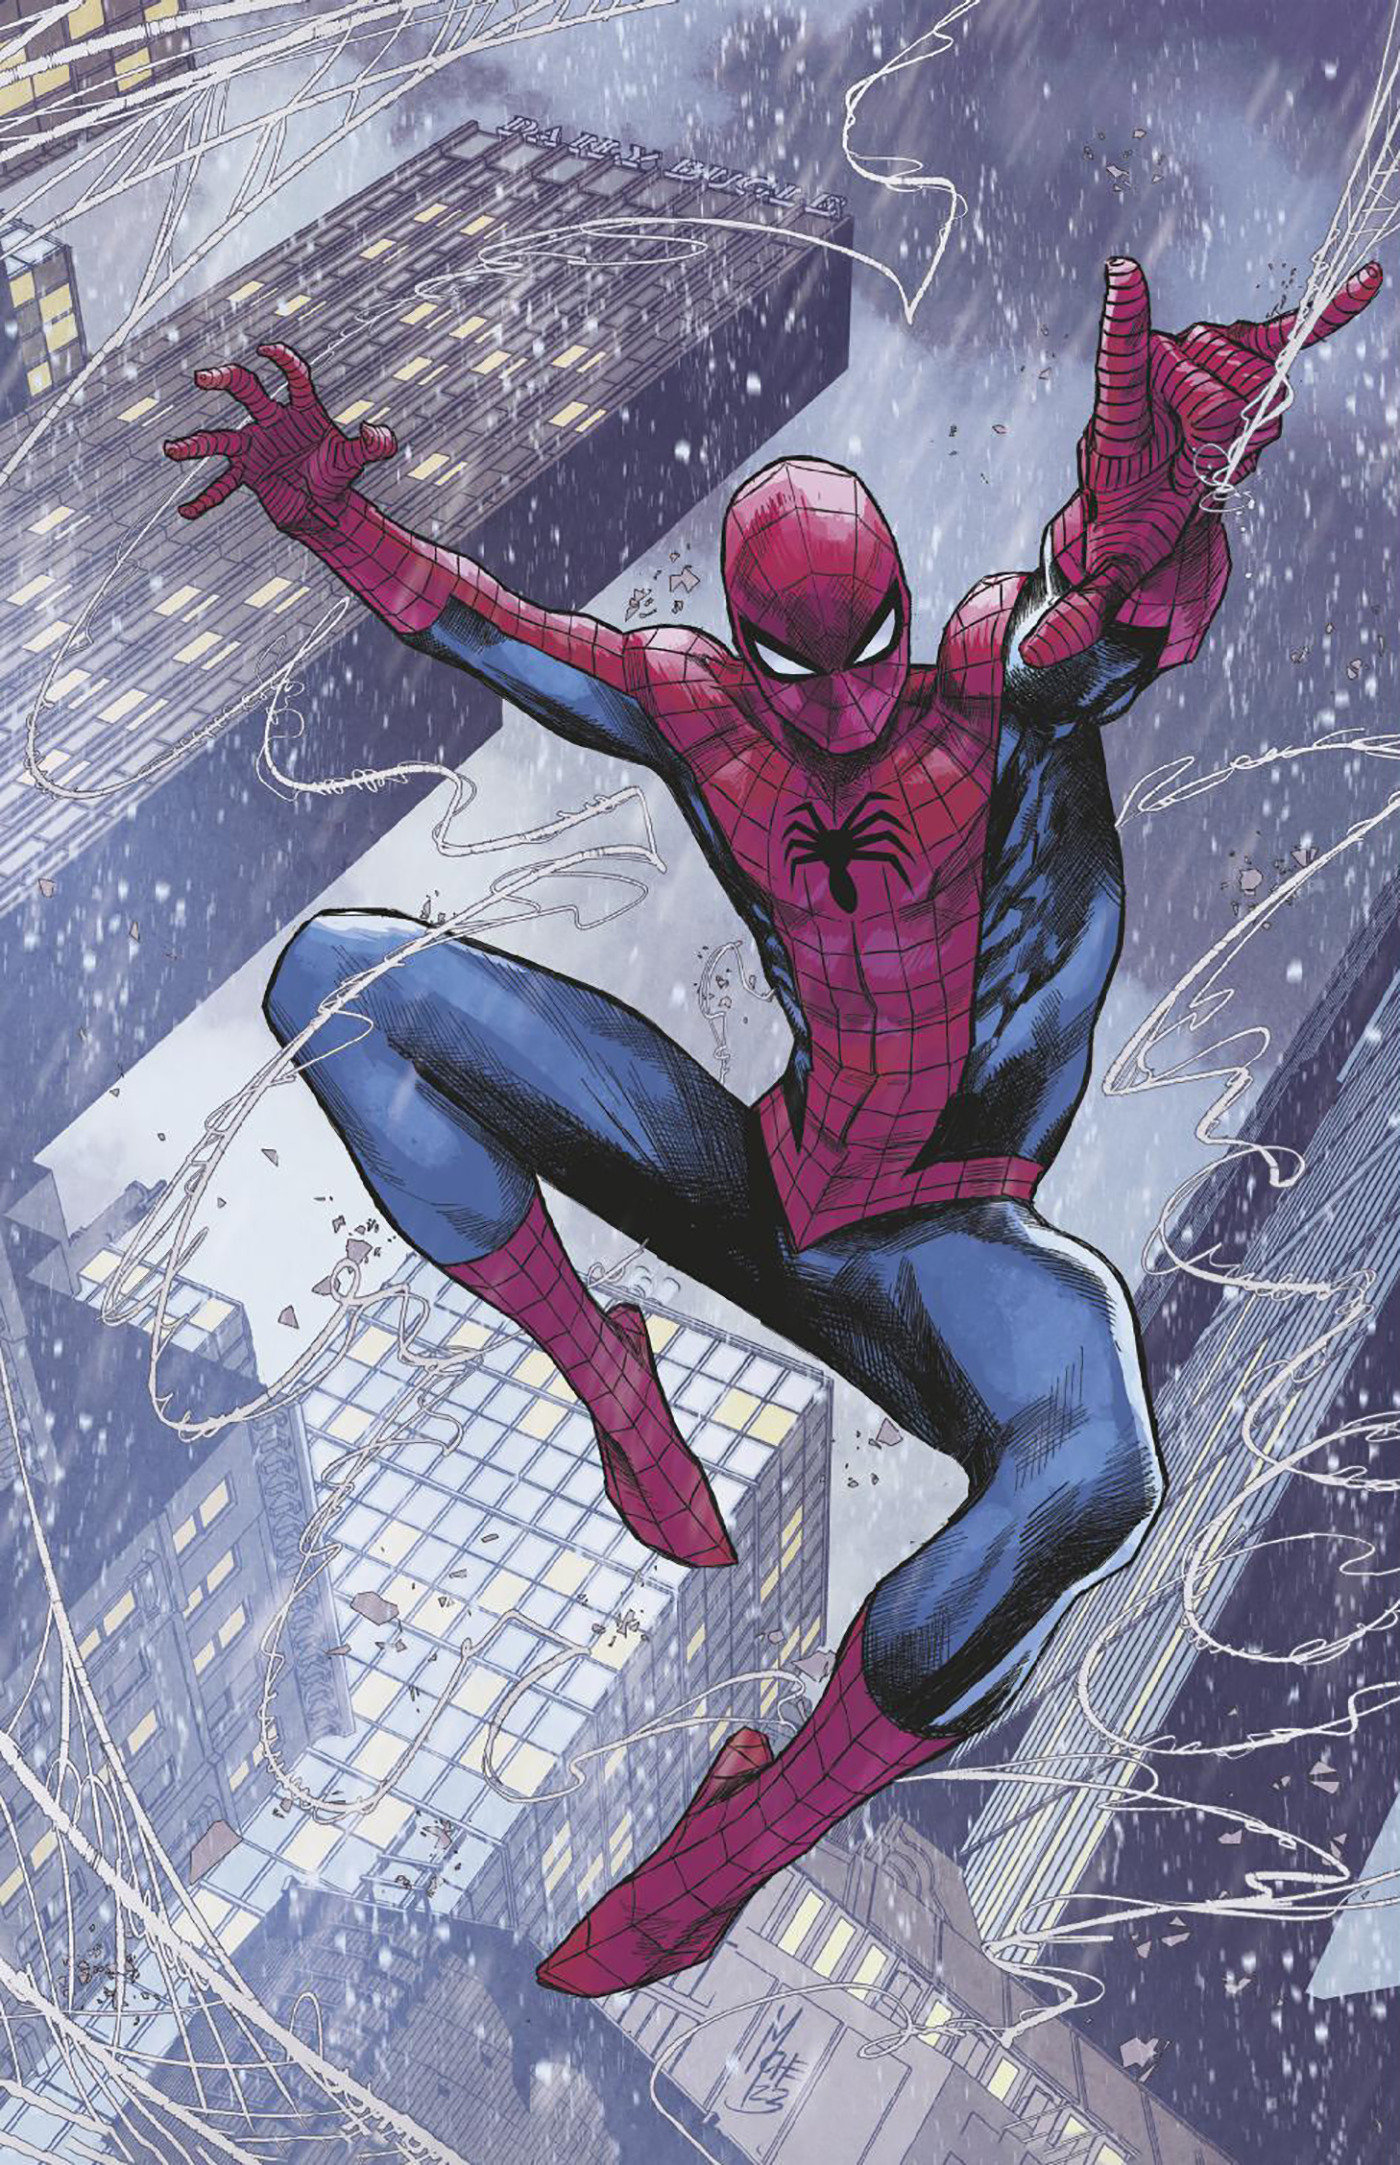 Ultimate Spider-Man #1 3rd Printing 1 for 25 Incentive Checchetto Variant